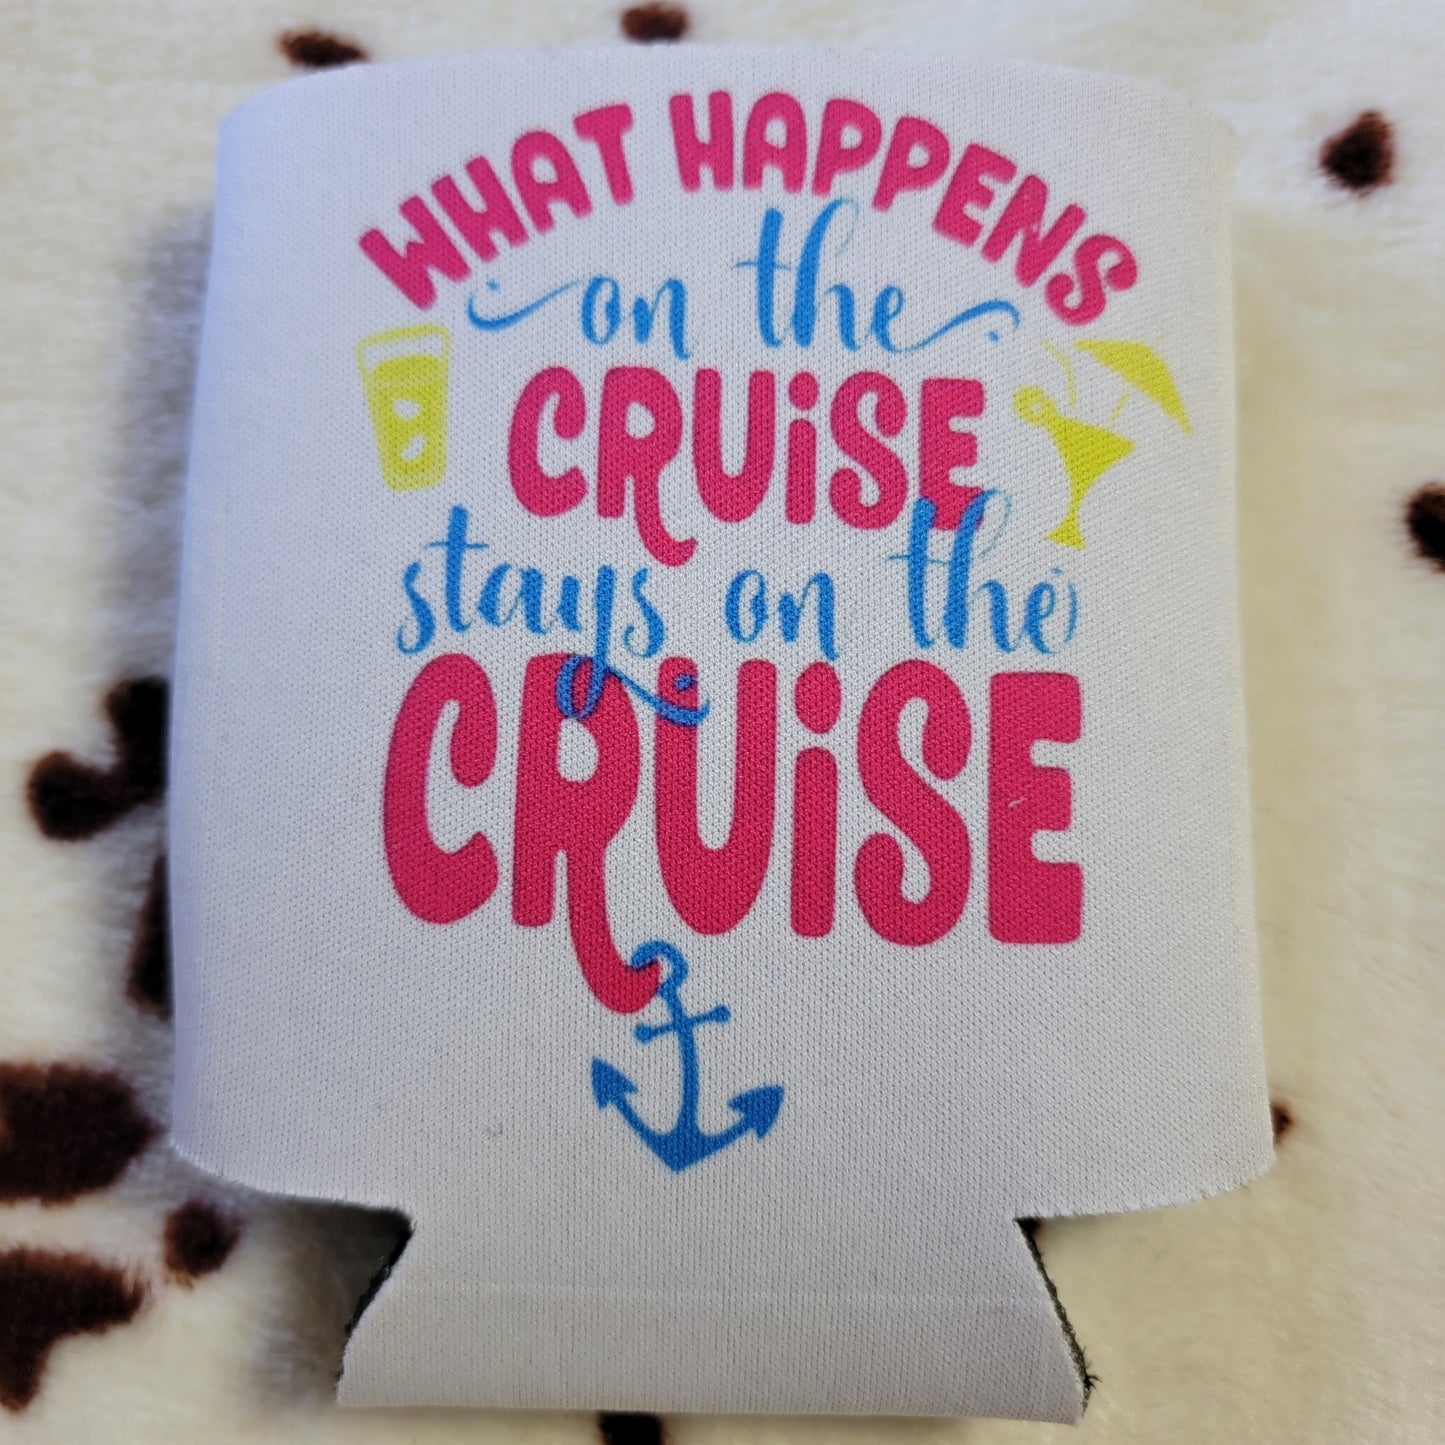 What Happens On A Cruise Can Cooler Drink Holder Koozie